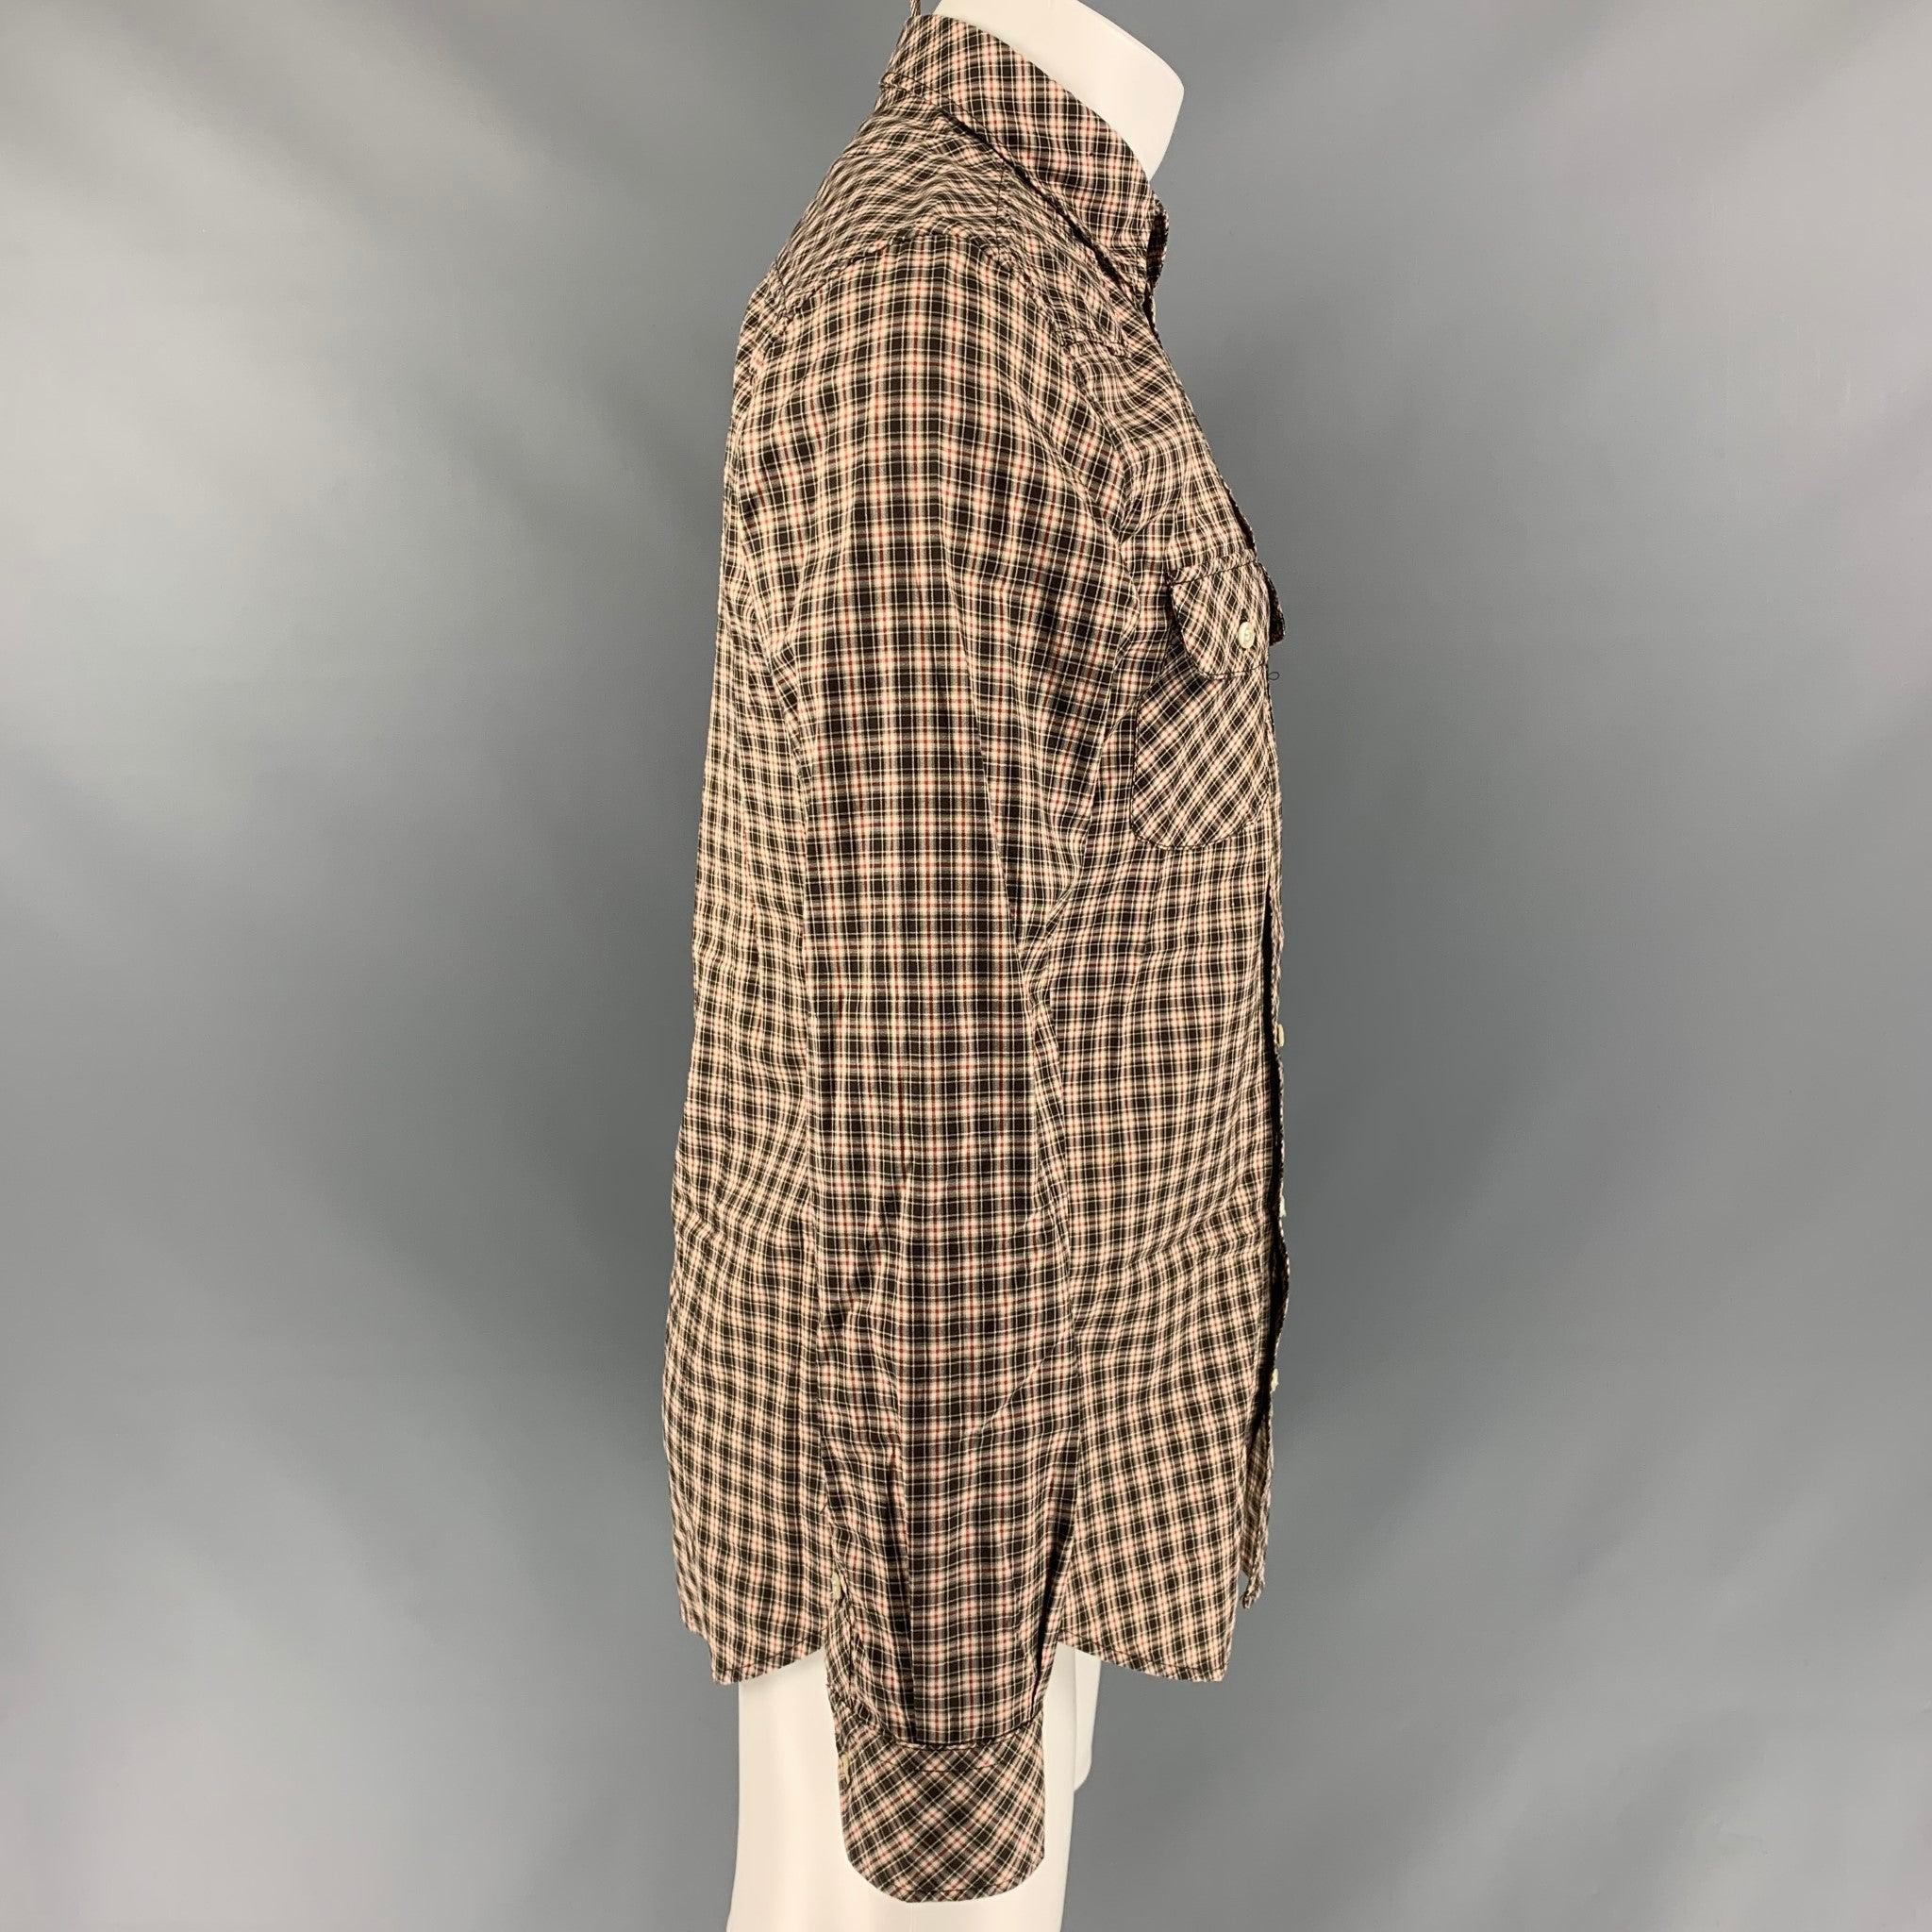 D&G by DOLCE & GABBANA 'Brad' long sleeve shirt comes in brown, white and red checkered cotton featuring a spread collar, patch pockets, a buttoned closure and one button angle cuff. Excellent Pre-Owned Condition. 

Marked:   15.5/ 40